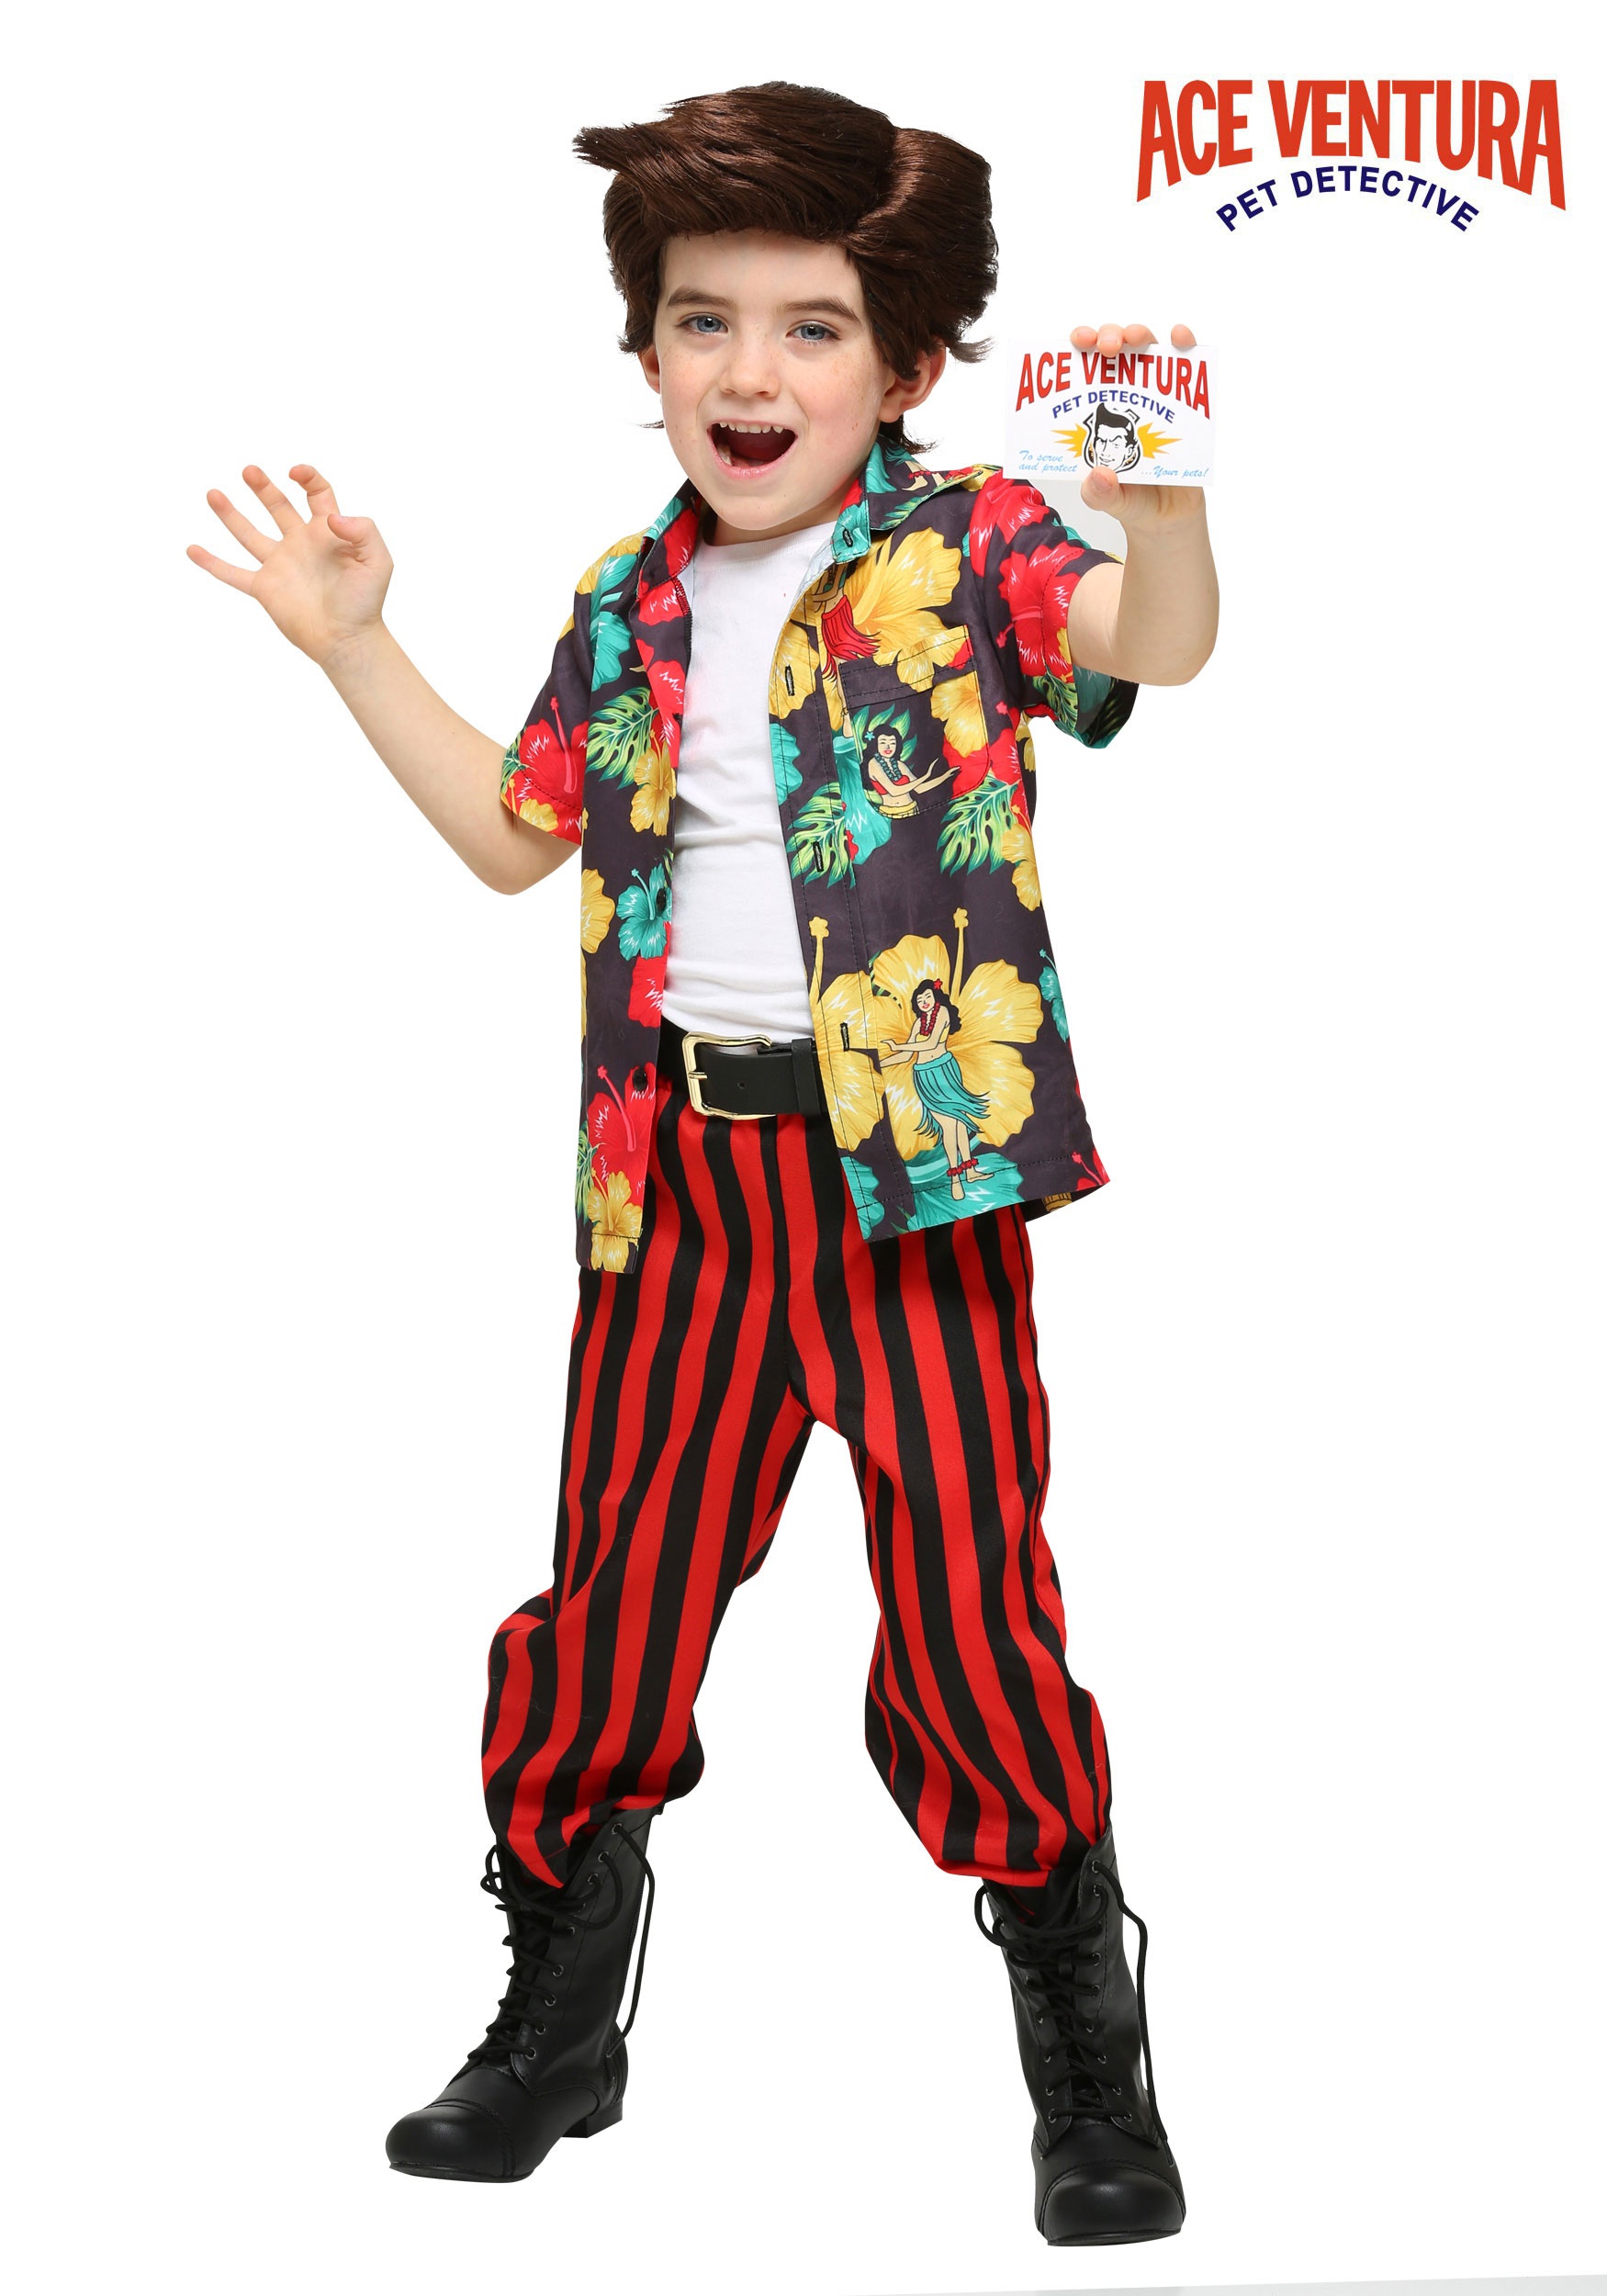 Ace Ventura Toddler Costume with Wig